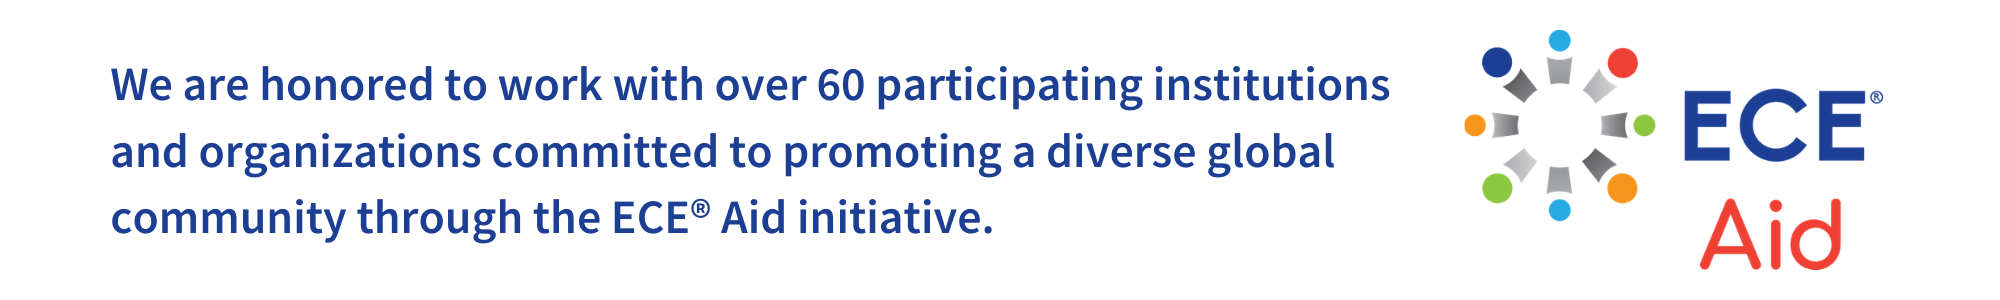 We are honored to work with over 50 participating institutions and organizations committed to promoting a diverse global community through the ECE Aid initiative.